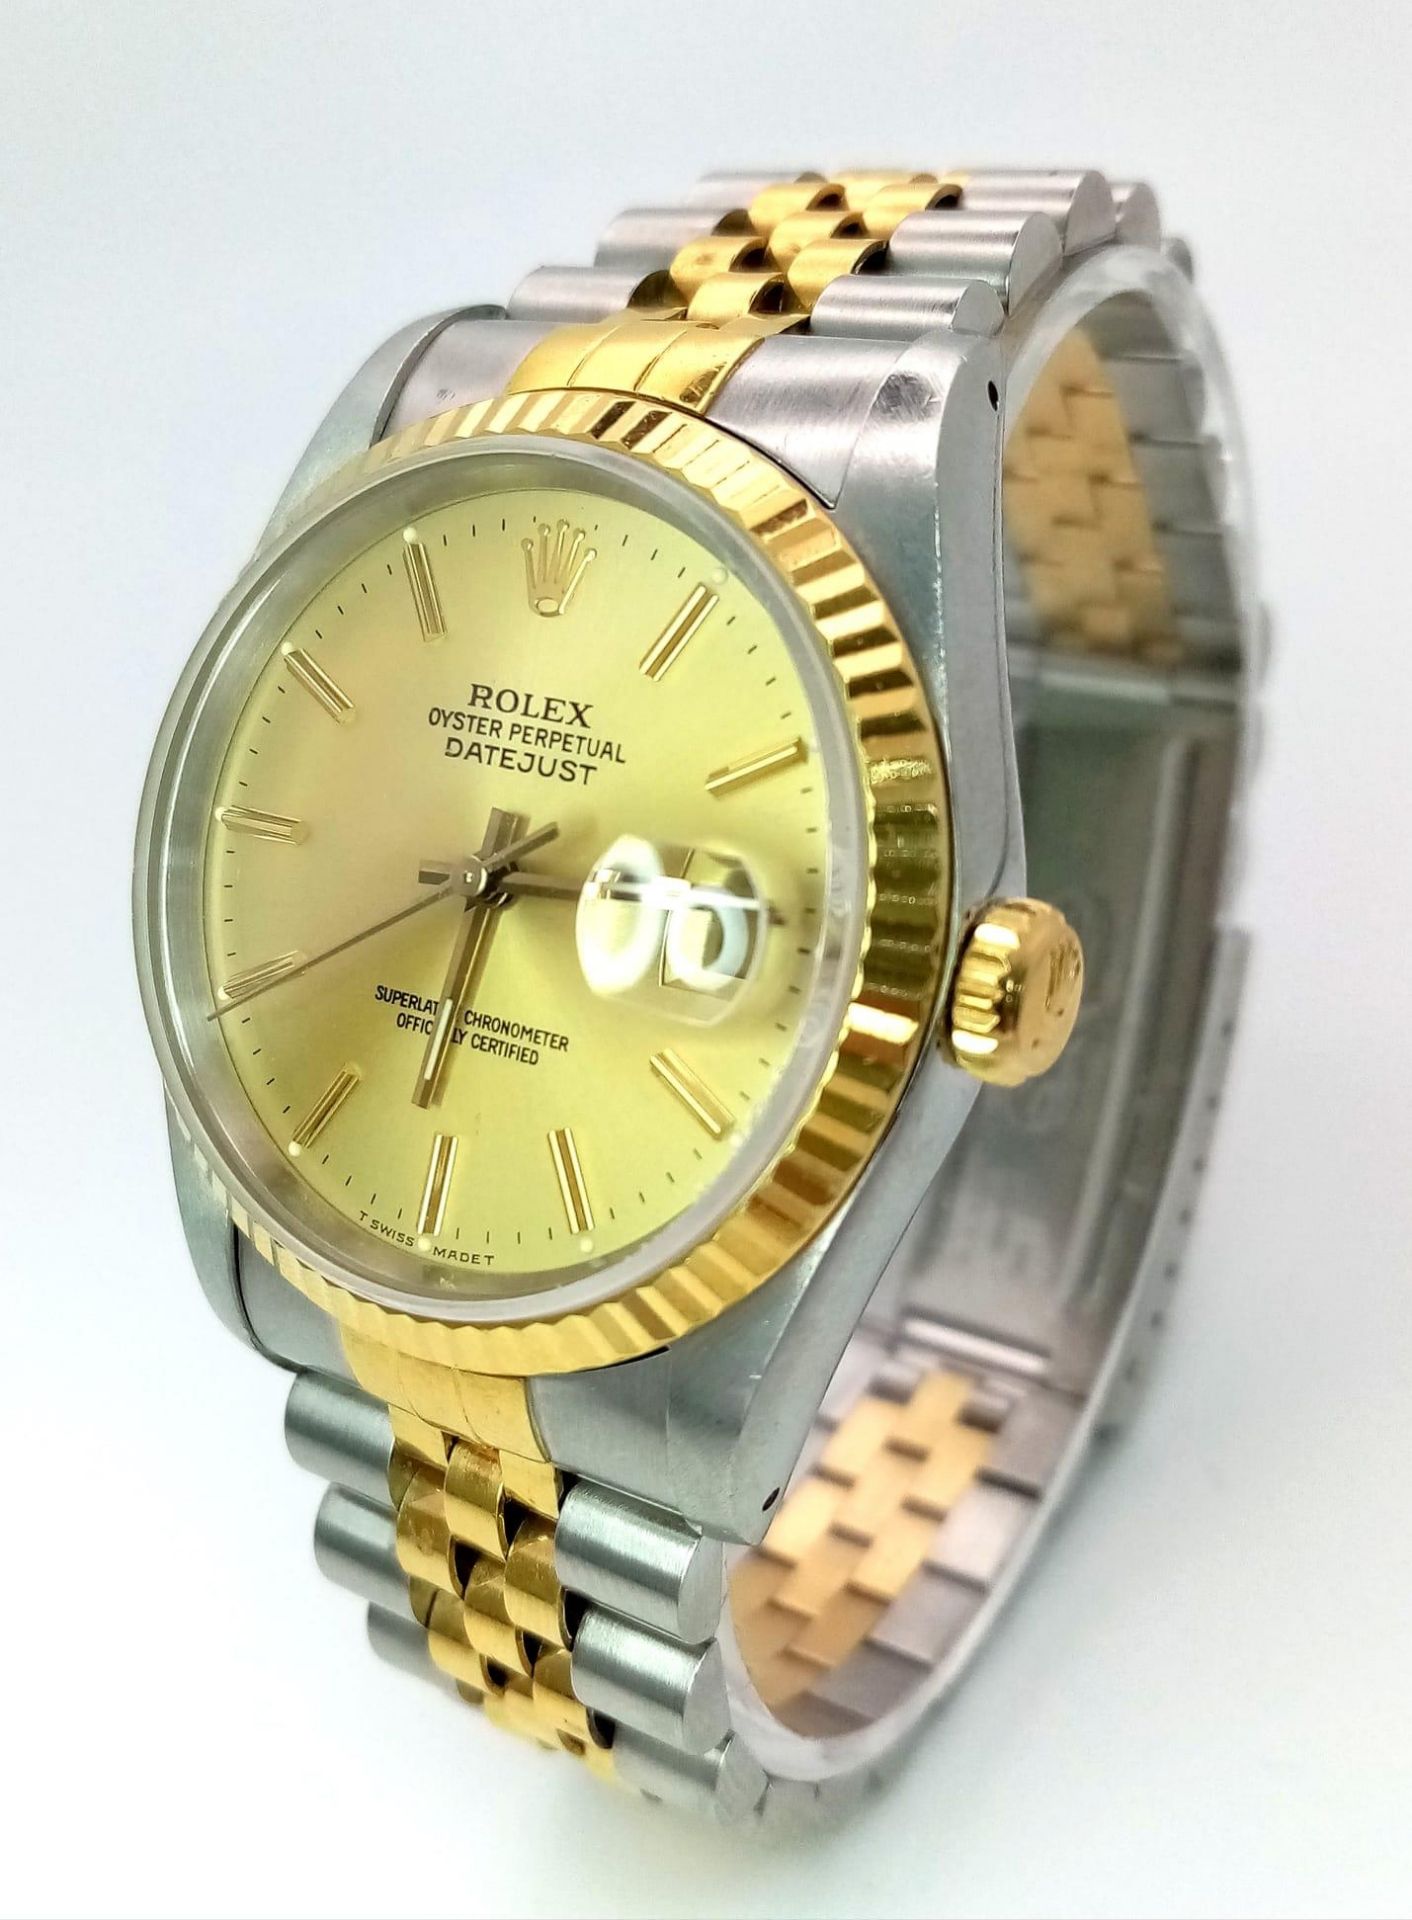 THE CLASSIC ROLEX OYSTER PERPETUAL DATEJUST IN BI-METAL WITH GOLDTONE DIAL . 36mm - Image 2 of 7